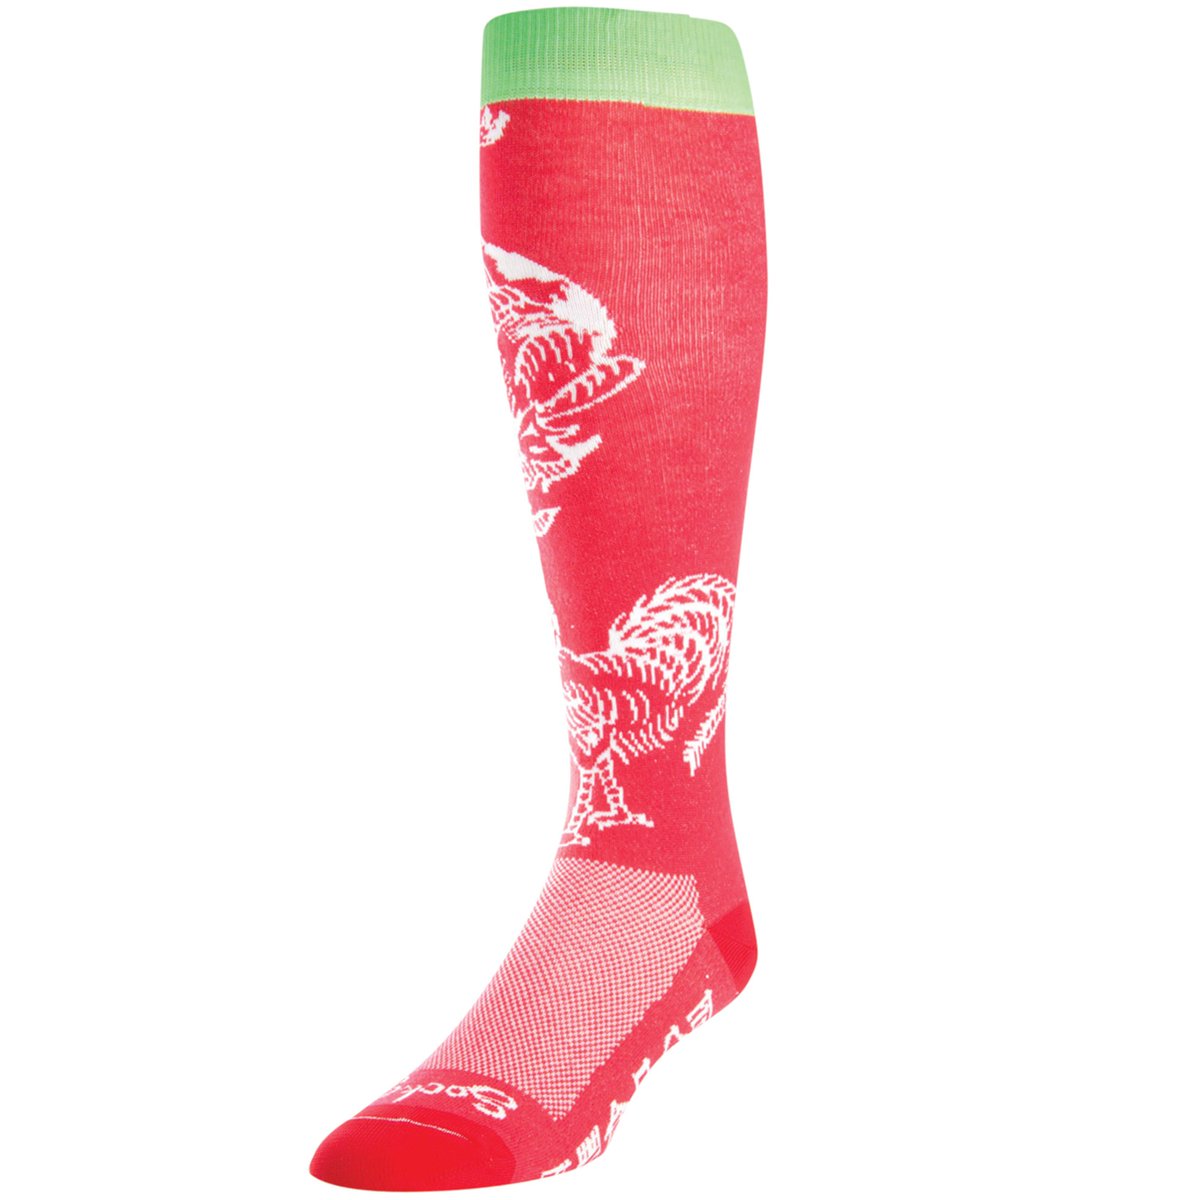 Sock game on fleek. Step your game up at sriracha2go.com #srirachasocks #sriracha #sriracha2go